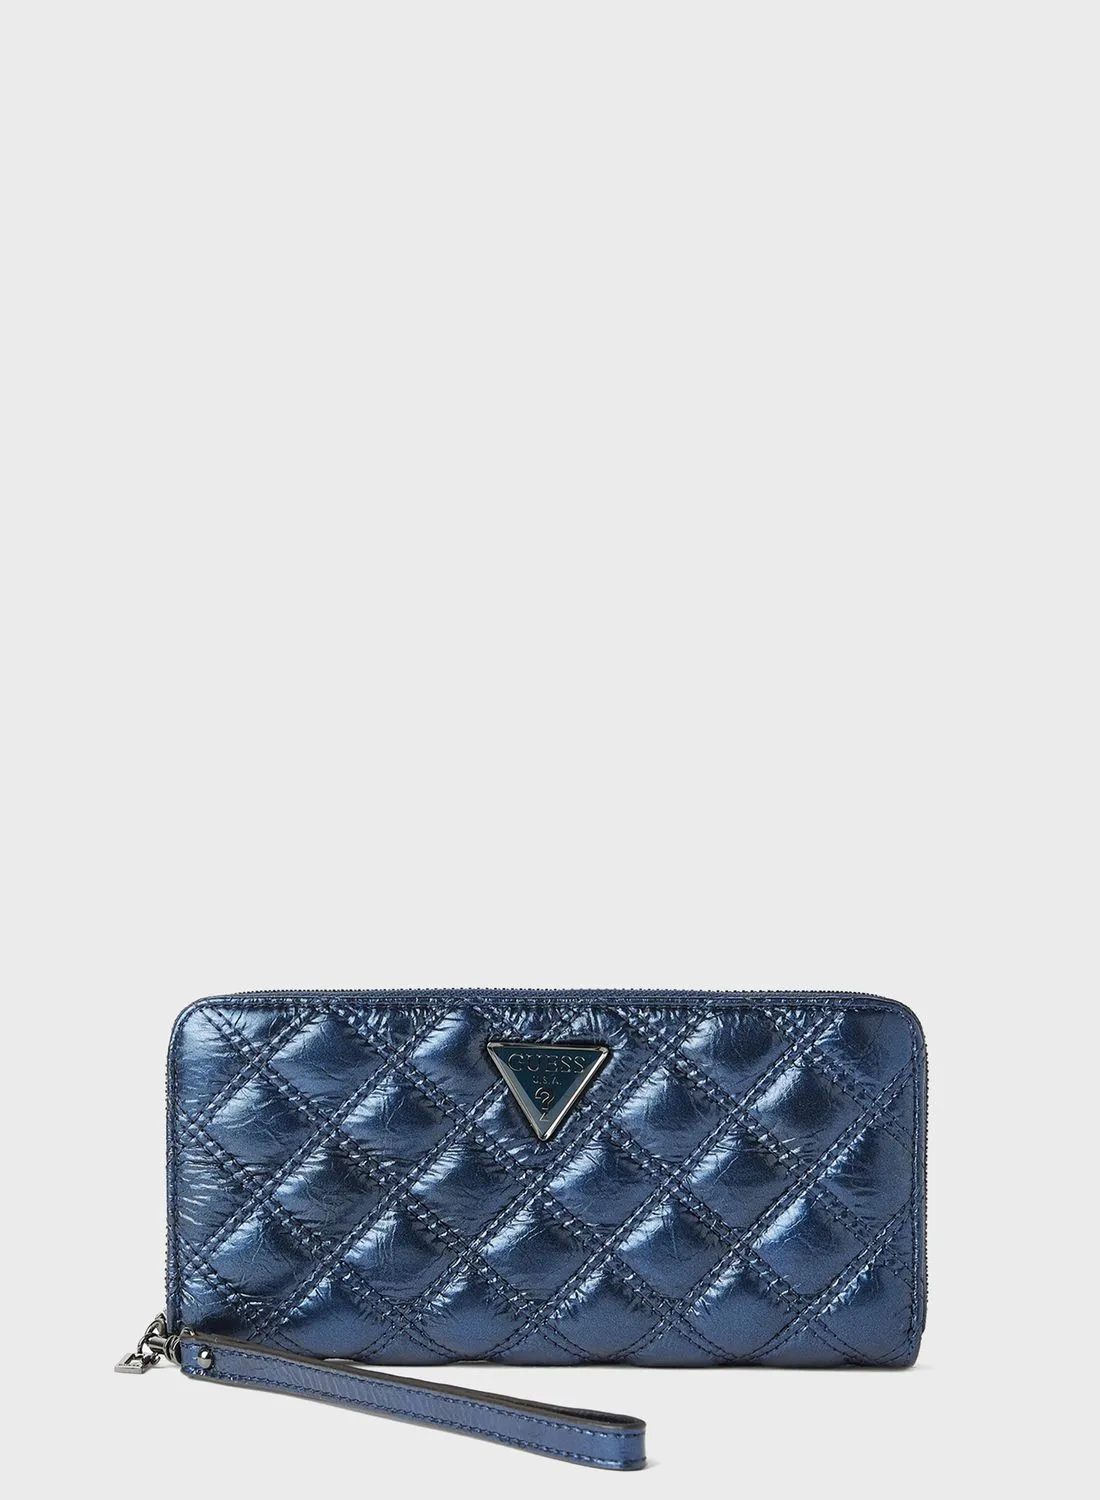 GUESS Cessily Large Zip Around Wallet